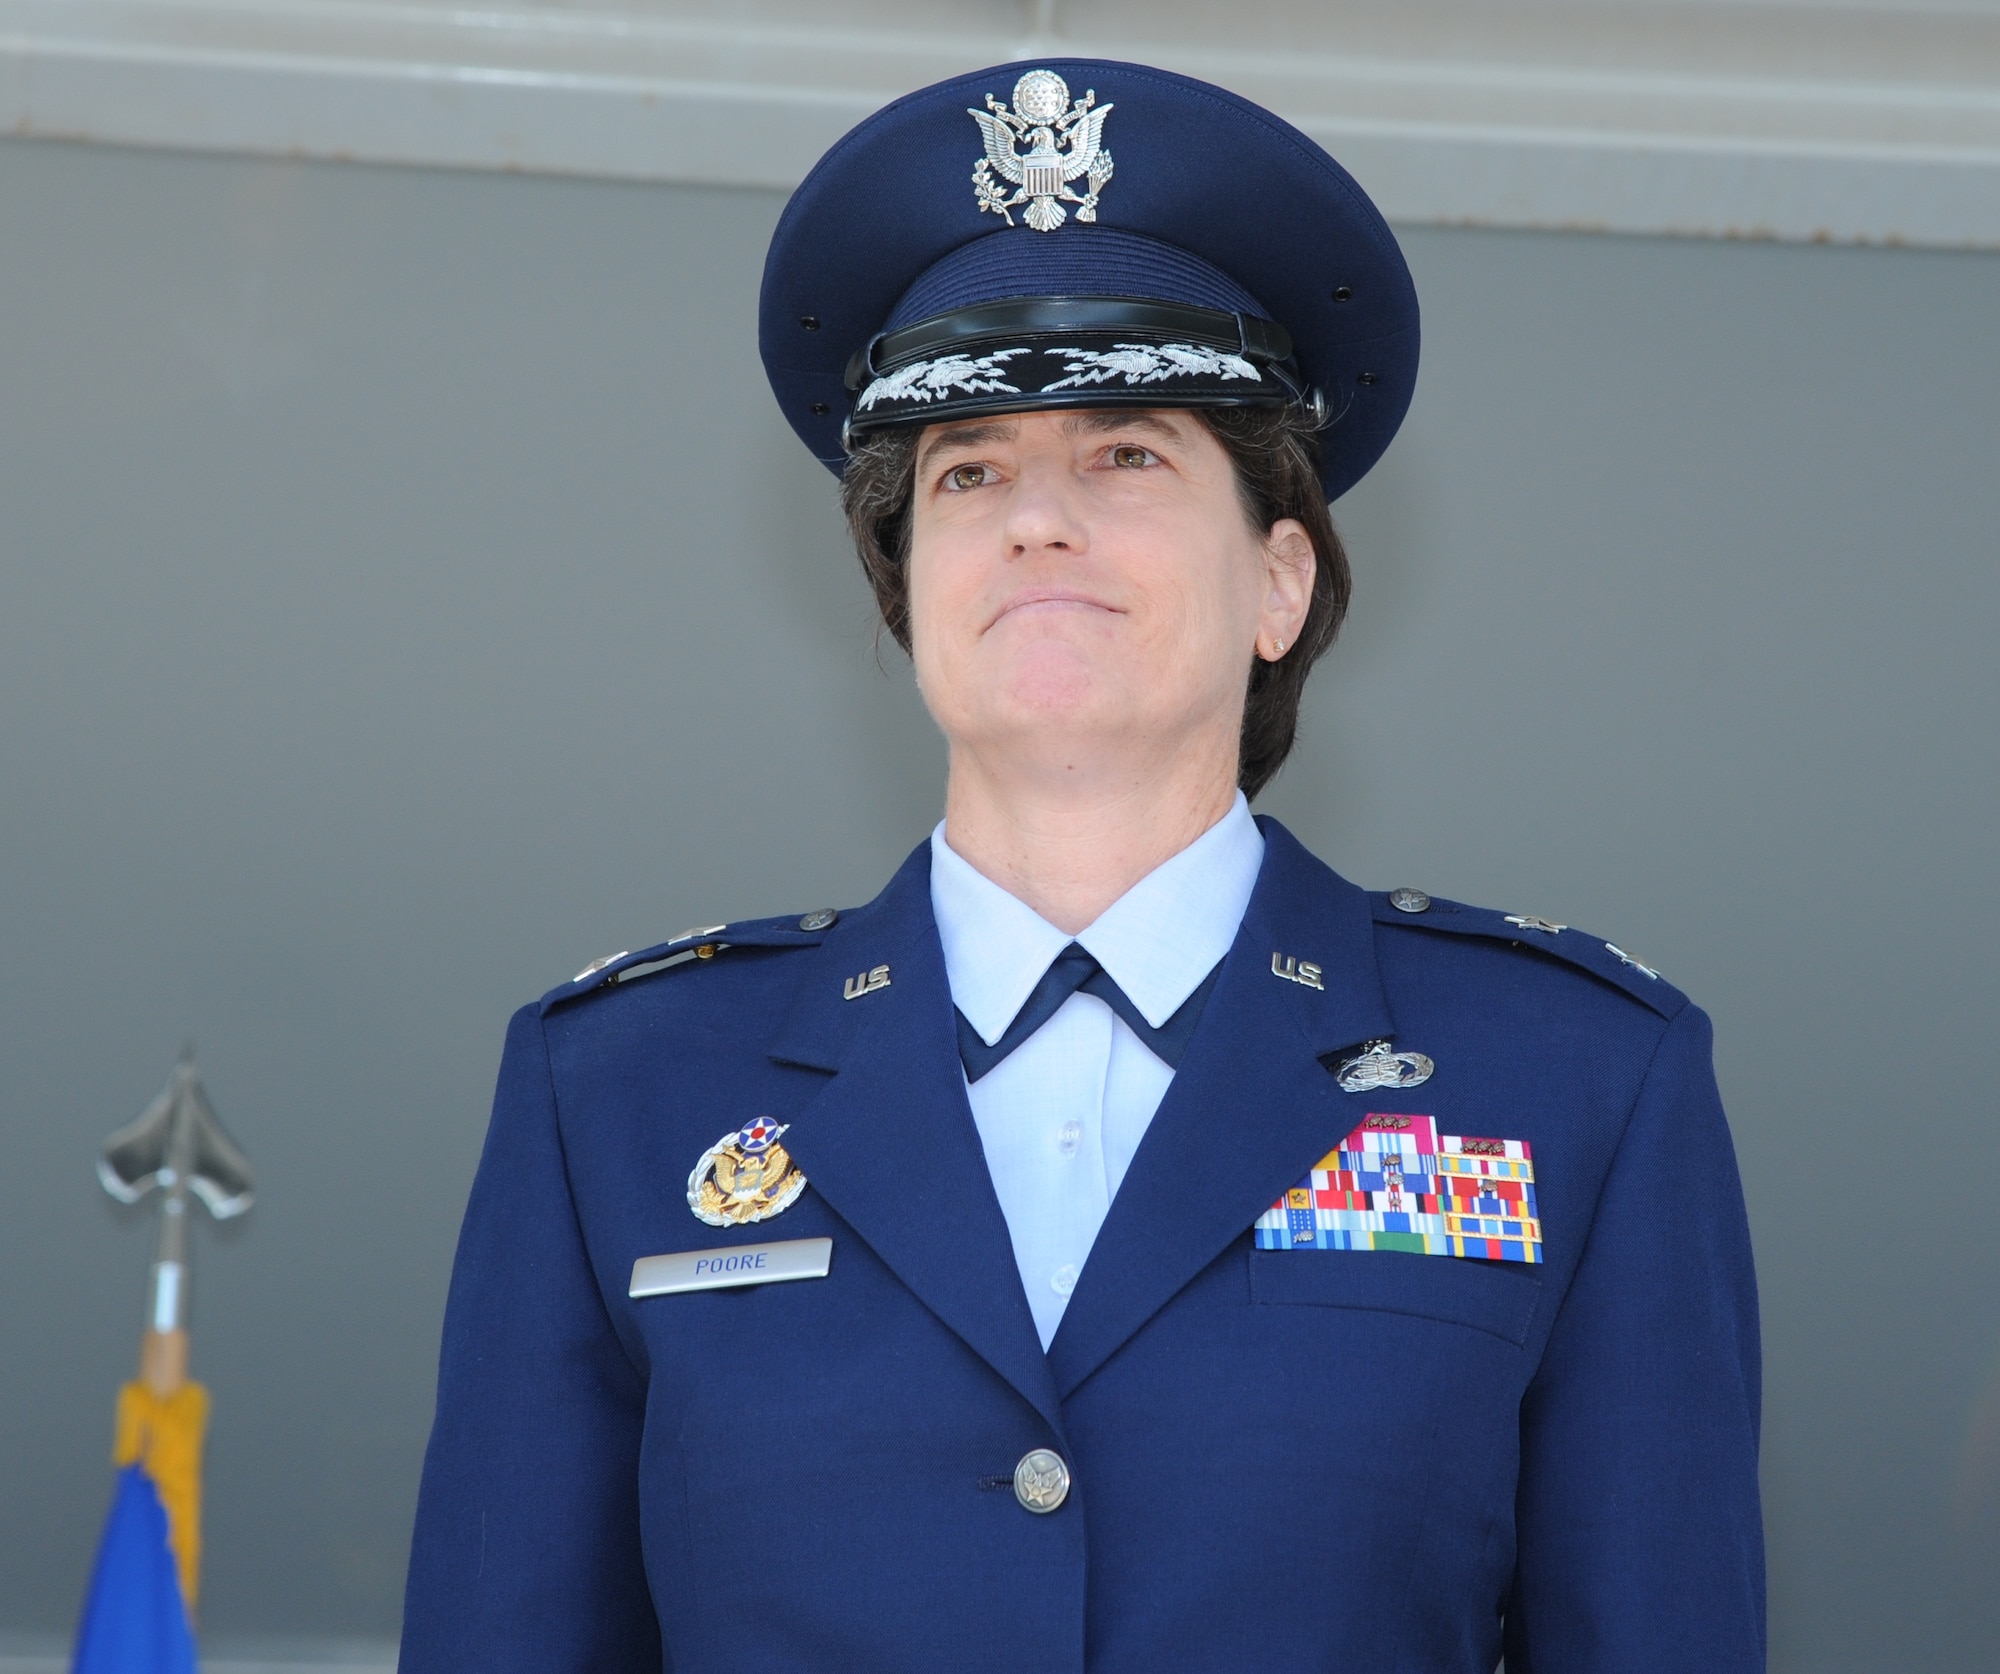 Maj. Gen. Peggy Poore accepted command of the Air Force Personnel Center from Lt. Gen. Darrell Jones, the Air Force deputy chief of staff for manpower, personnel and services, during the AFPC change of command ceremony Aug. 1, 2013, at Joint Base San Antonio-Randolph, Texas. Relinquishing command was Maj. Gen. A.J. Stewart, who commanded AFPC since Aug. 6, 2010. (Courtesy Photo)